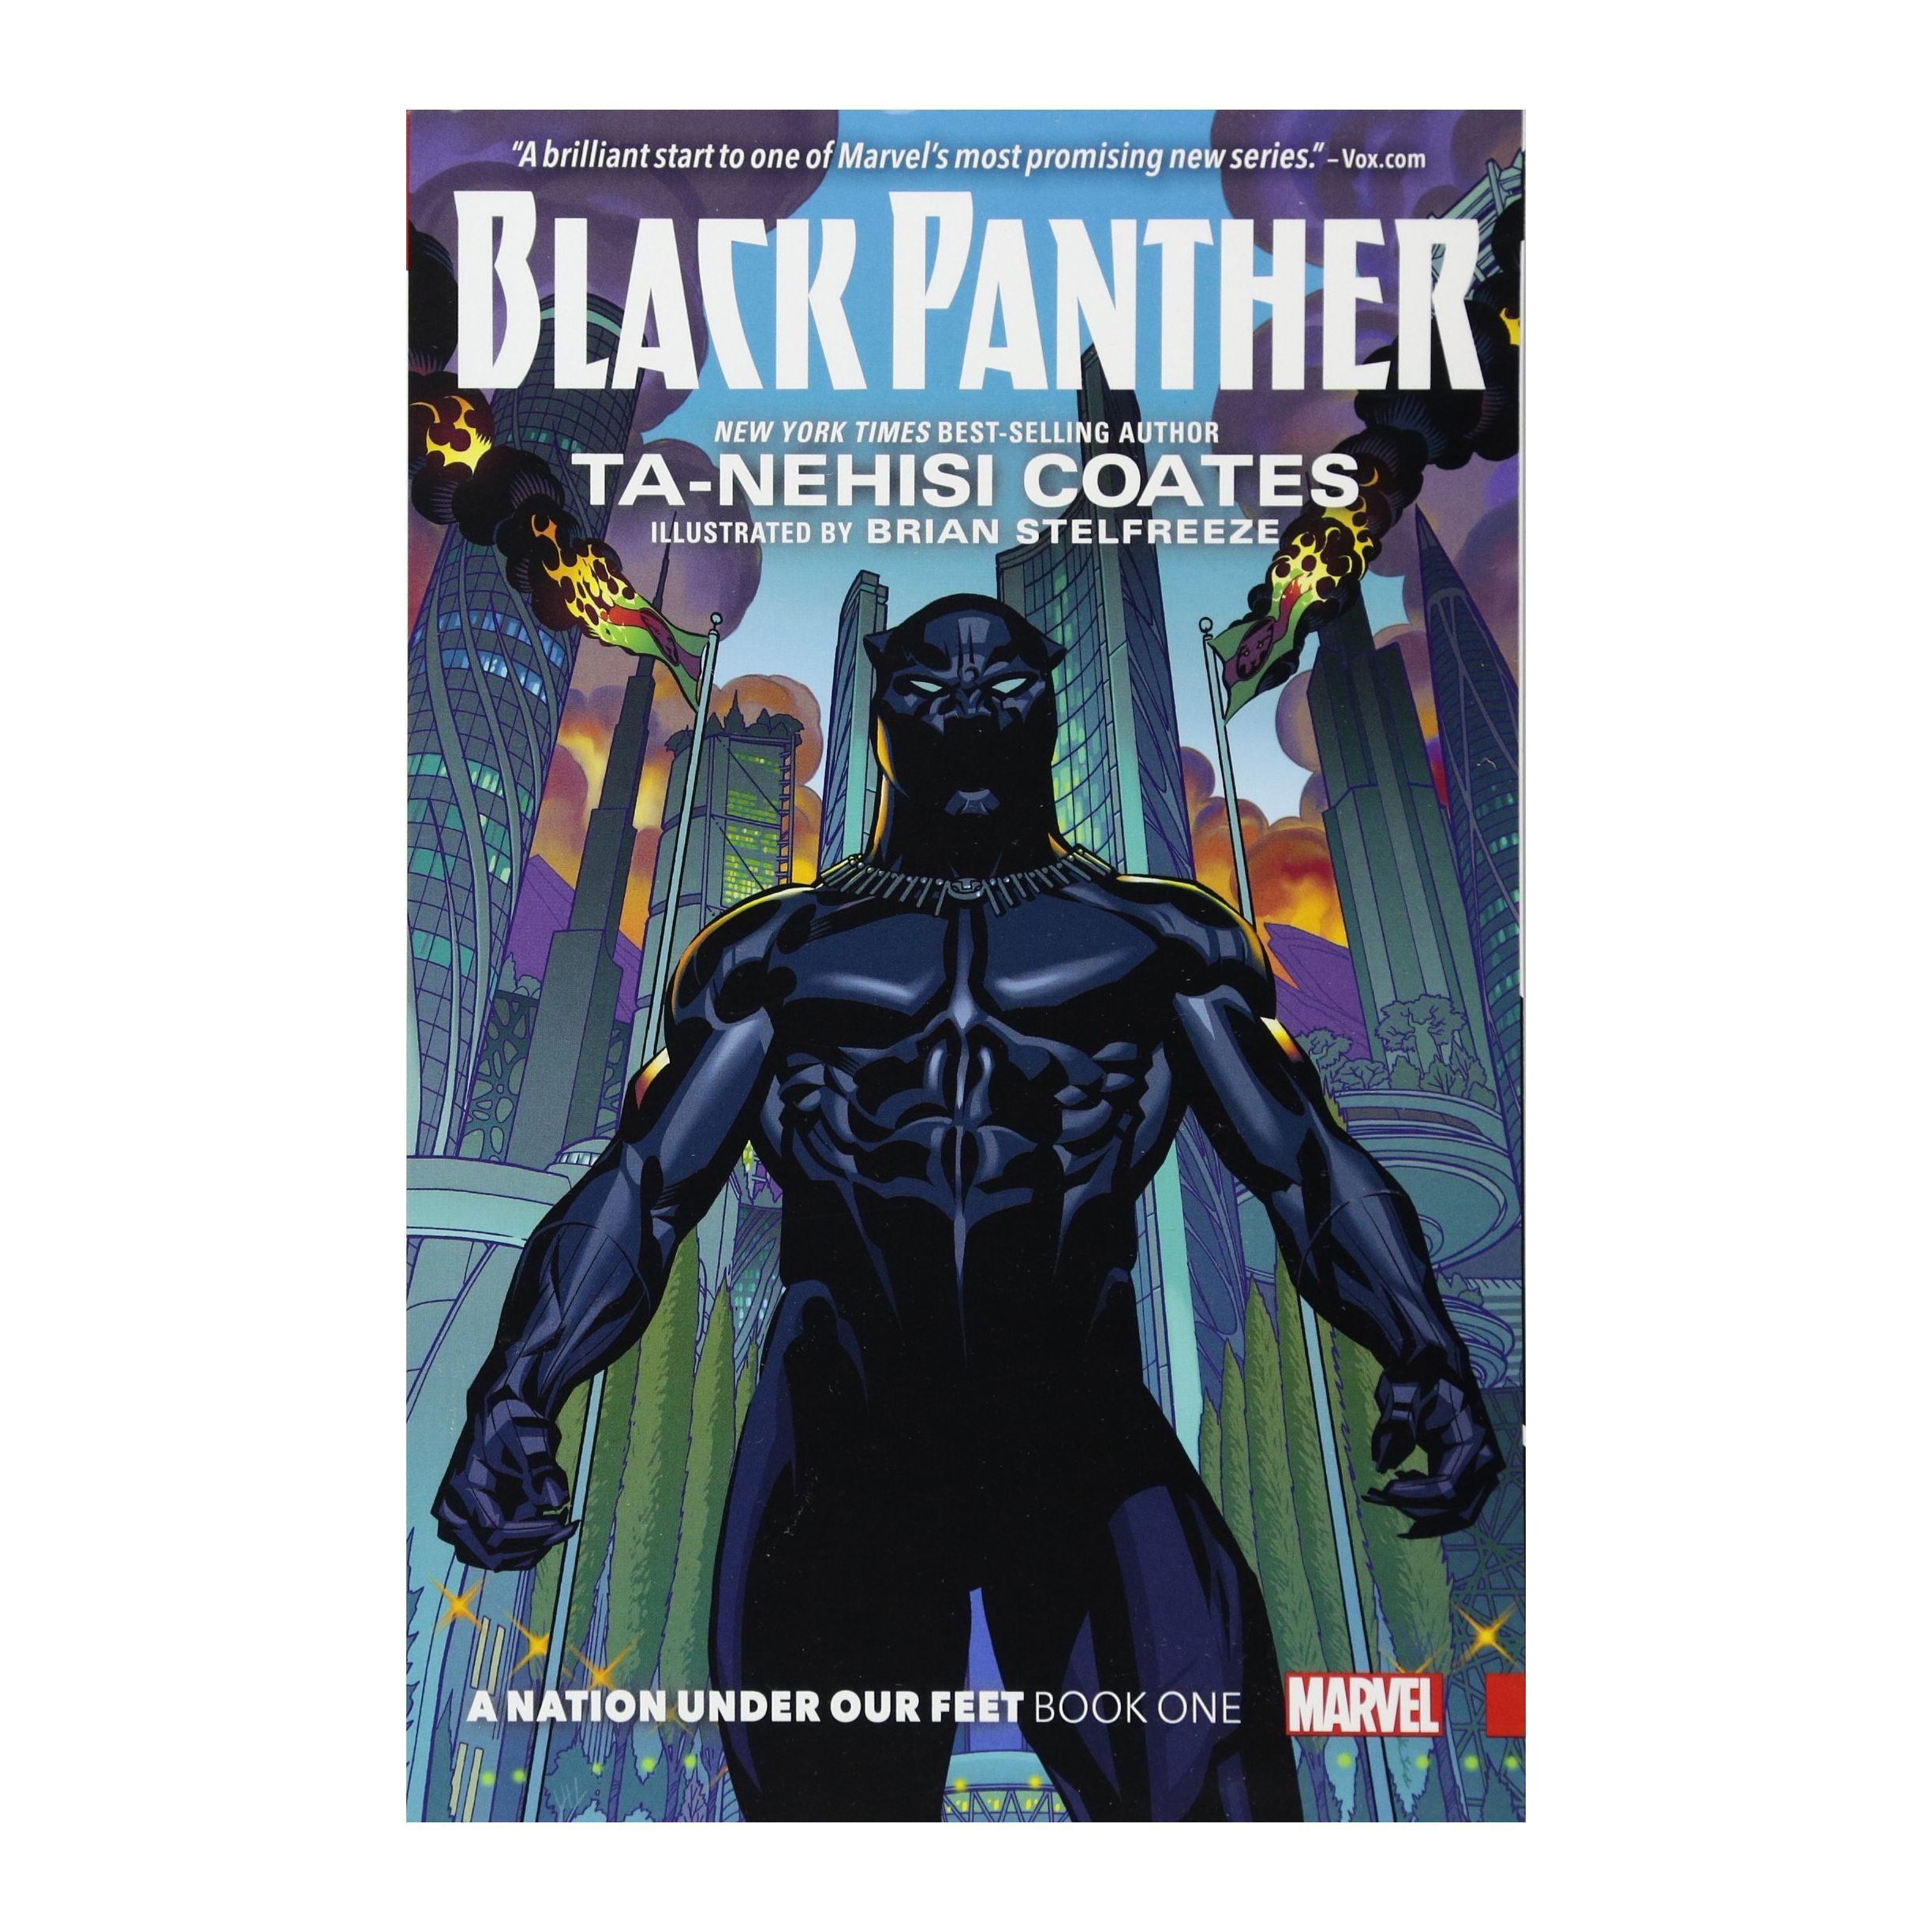 Black Panther: A Nation Under Our Feet Book One